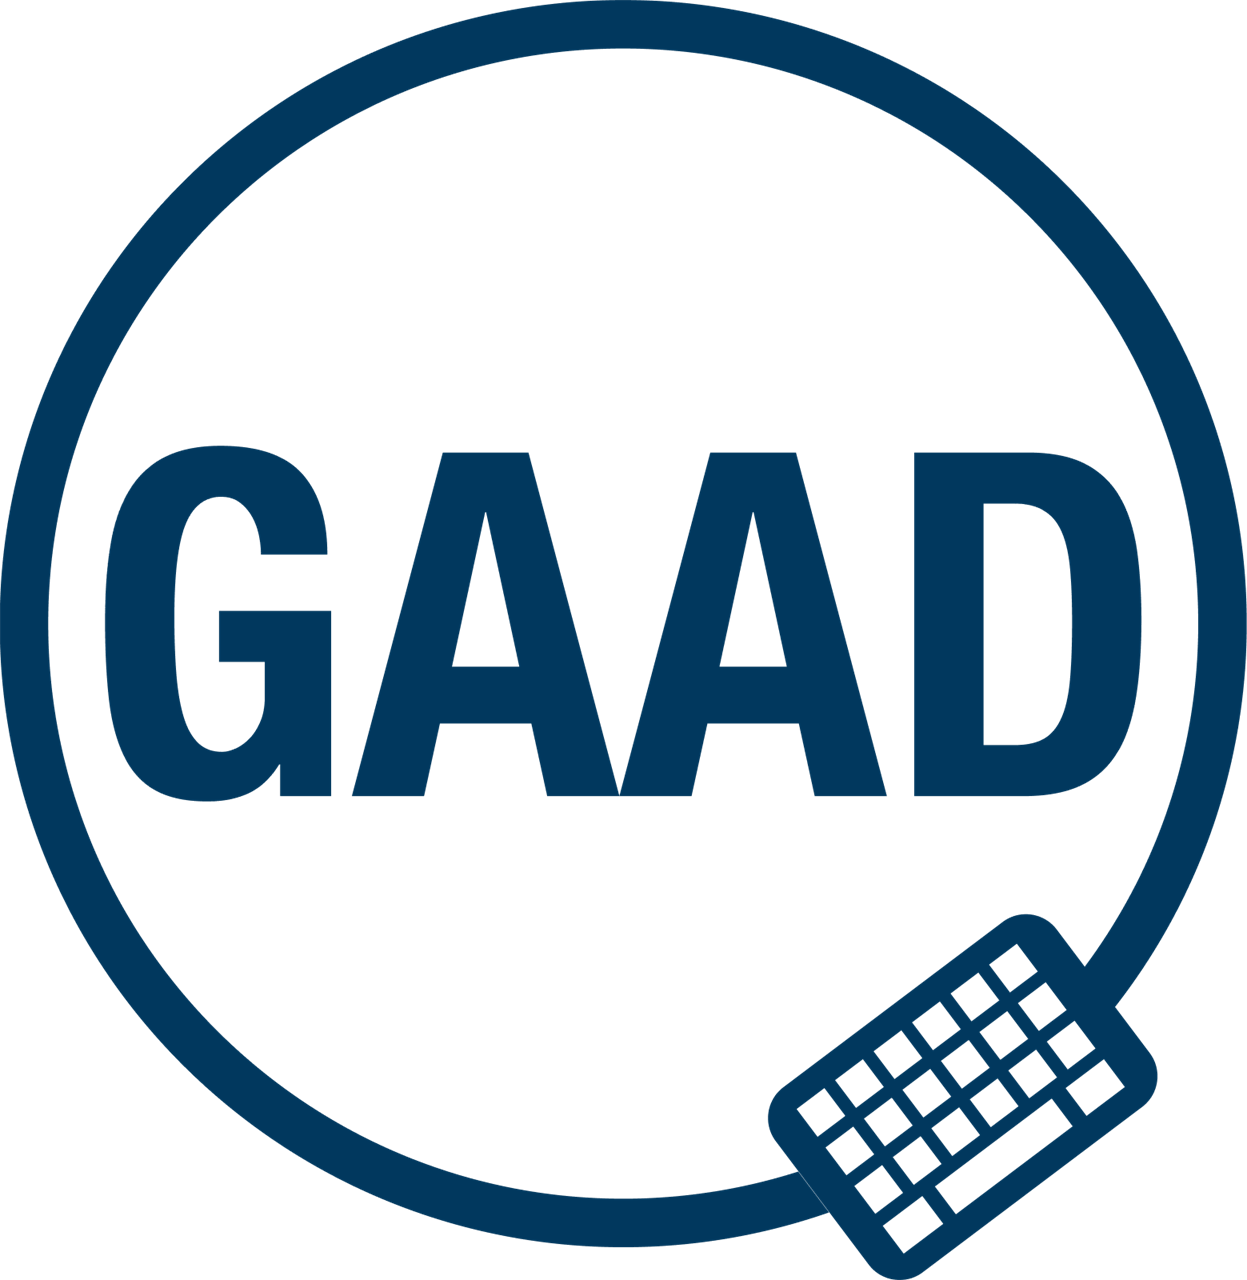 The logo for Global Accessibility Awareness Day (GAAD).